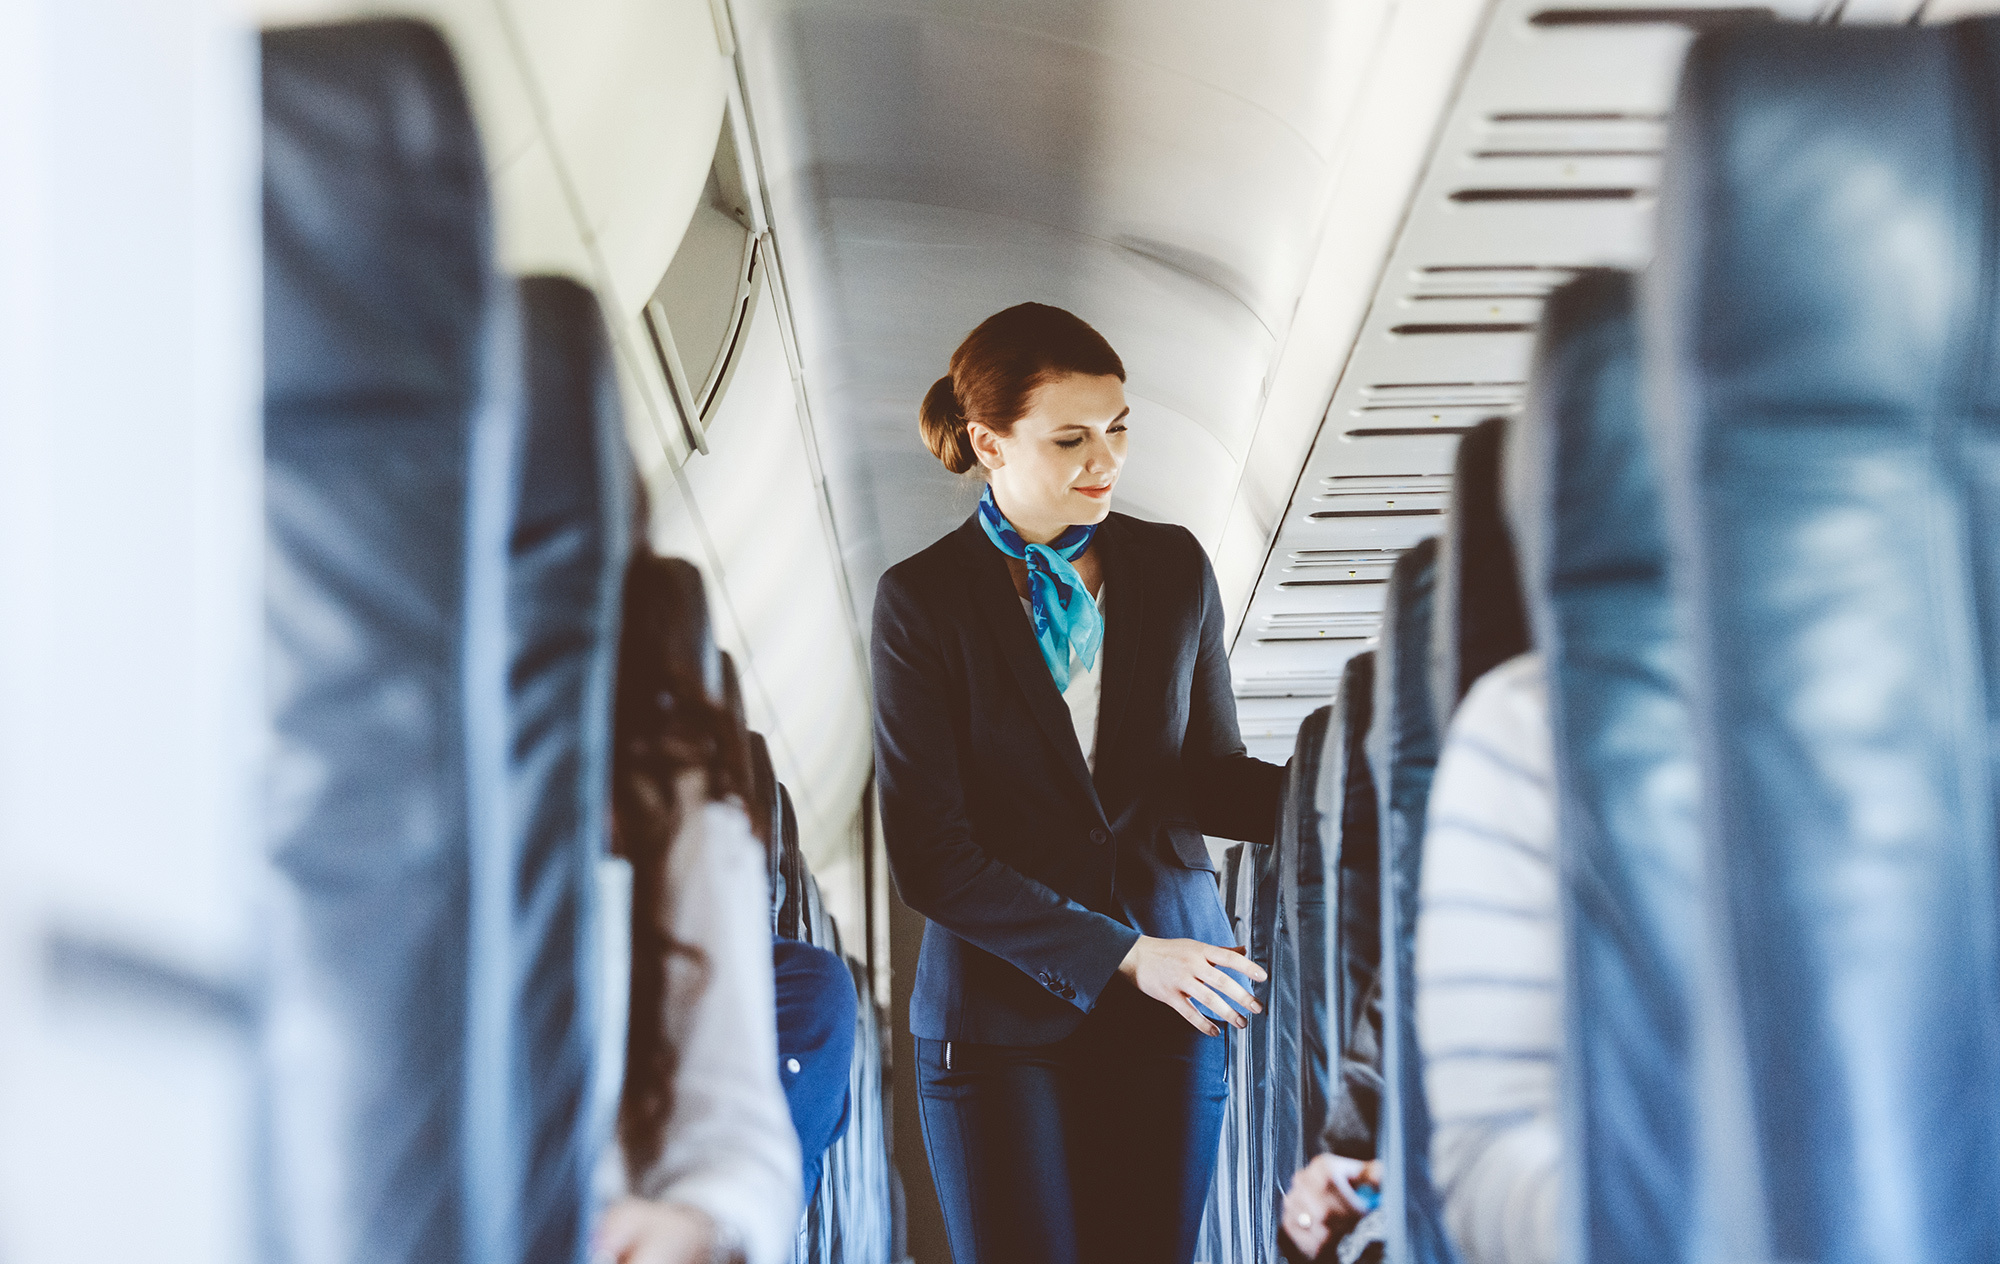 Flight Attendant, Self-defense training, Dealing with unruly passengers, Safety measures, 2000x1270 HD Desktop